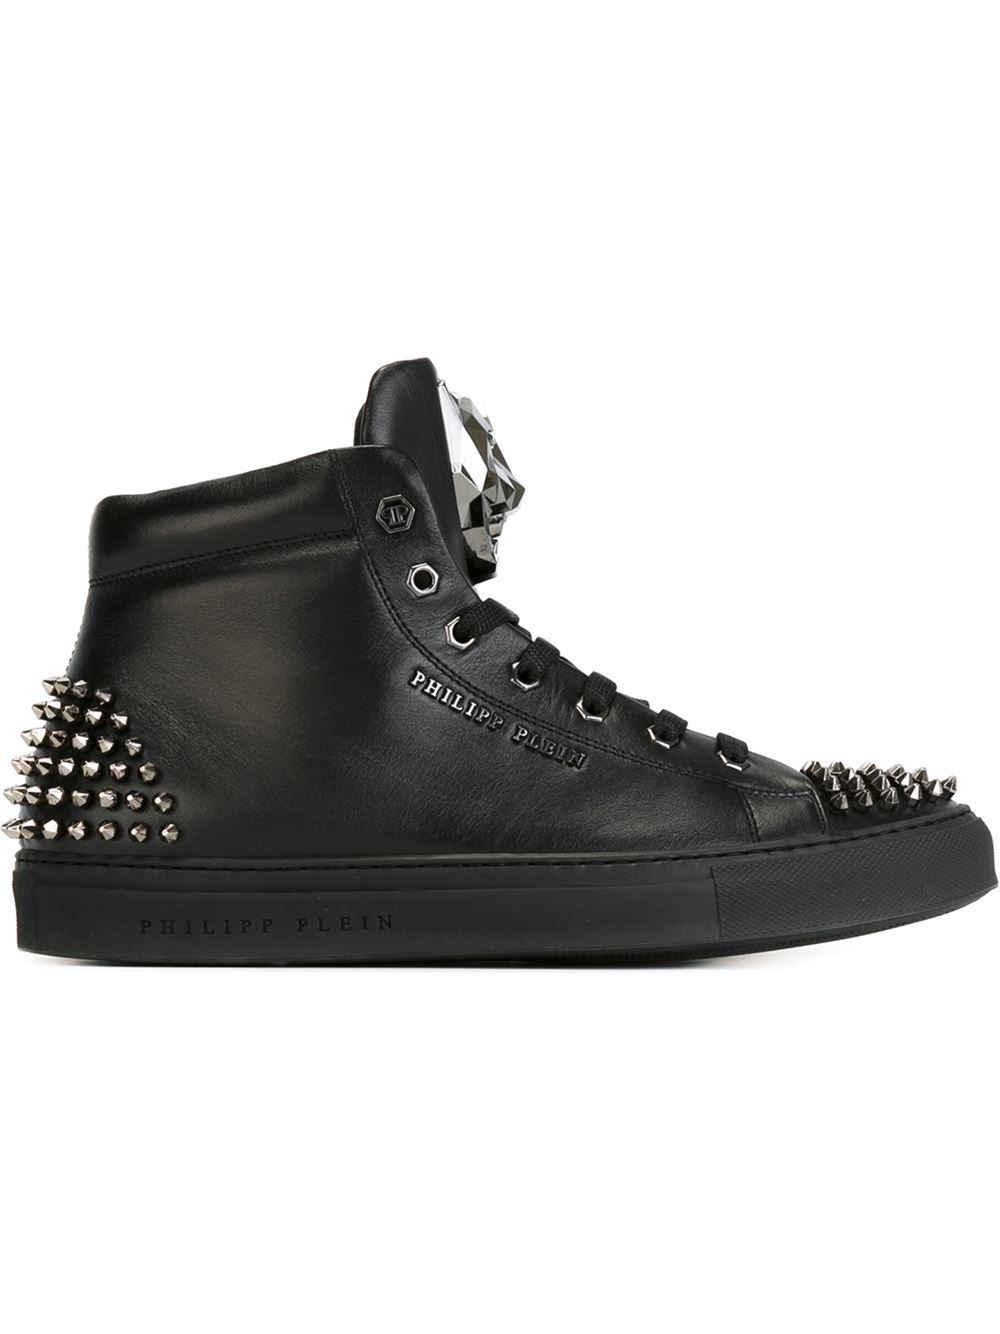 Philipp plein Spike-Studded Leather High-Top Sneakers in Black for Men ...